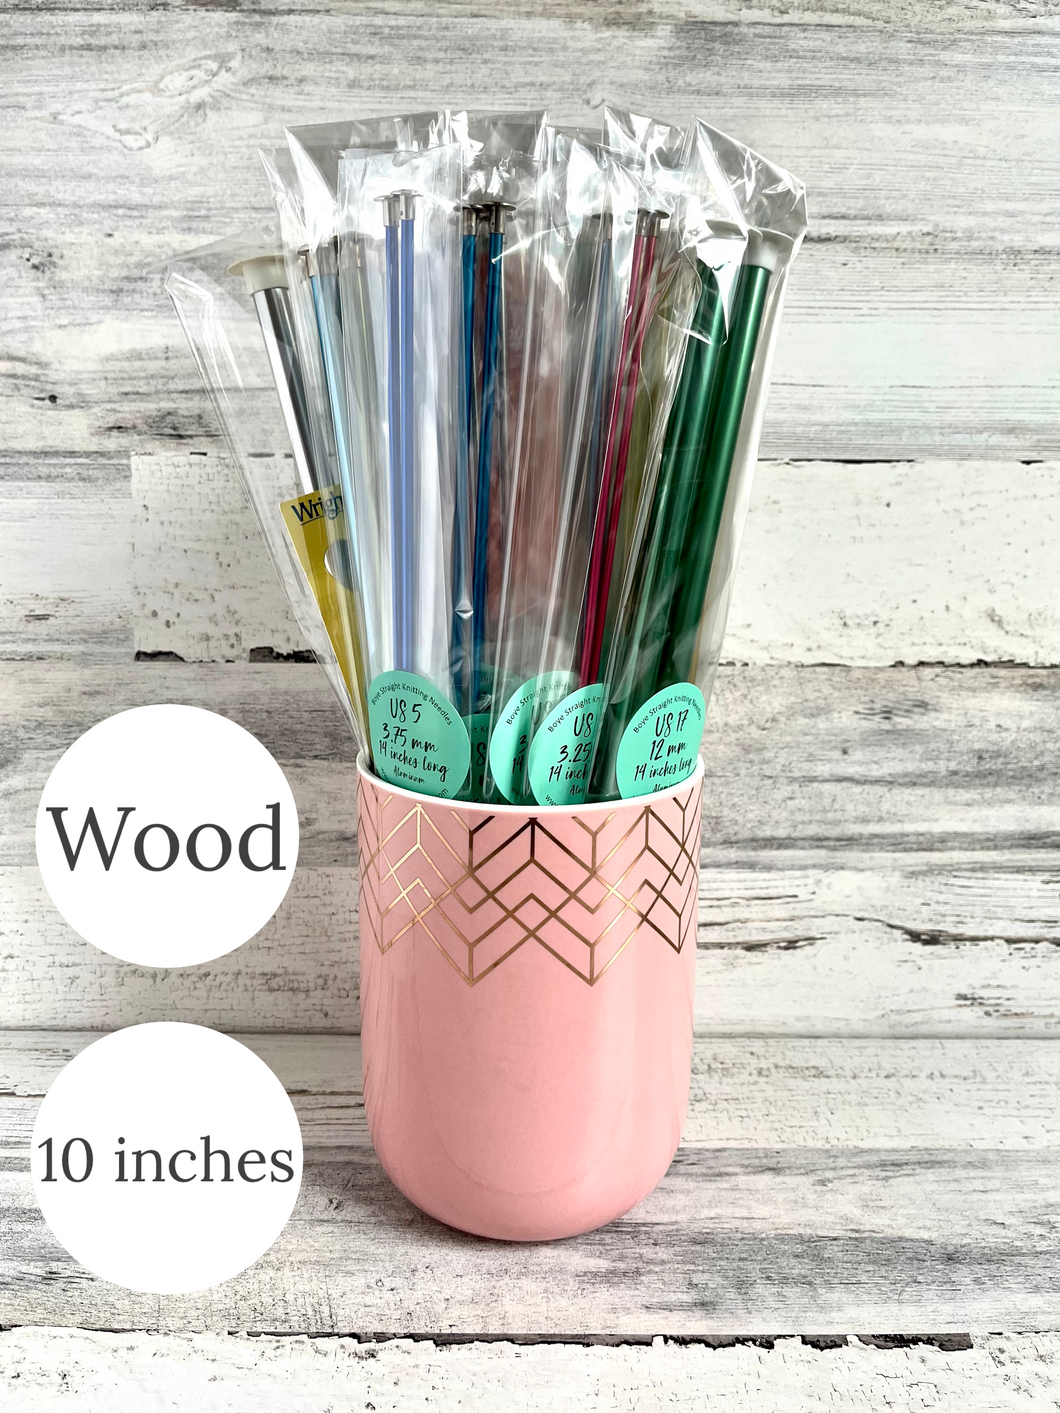 ALL Wood 10 inch Straight Knitting Needles